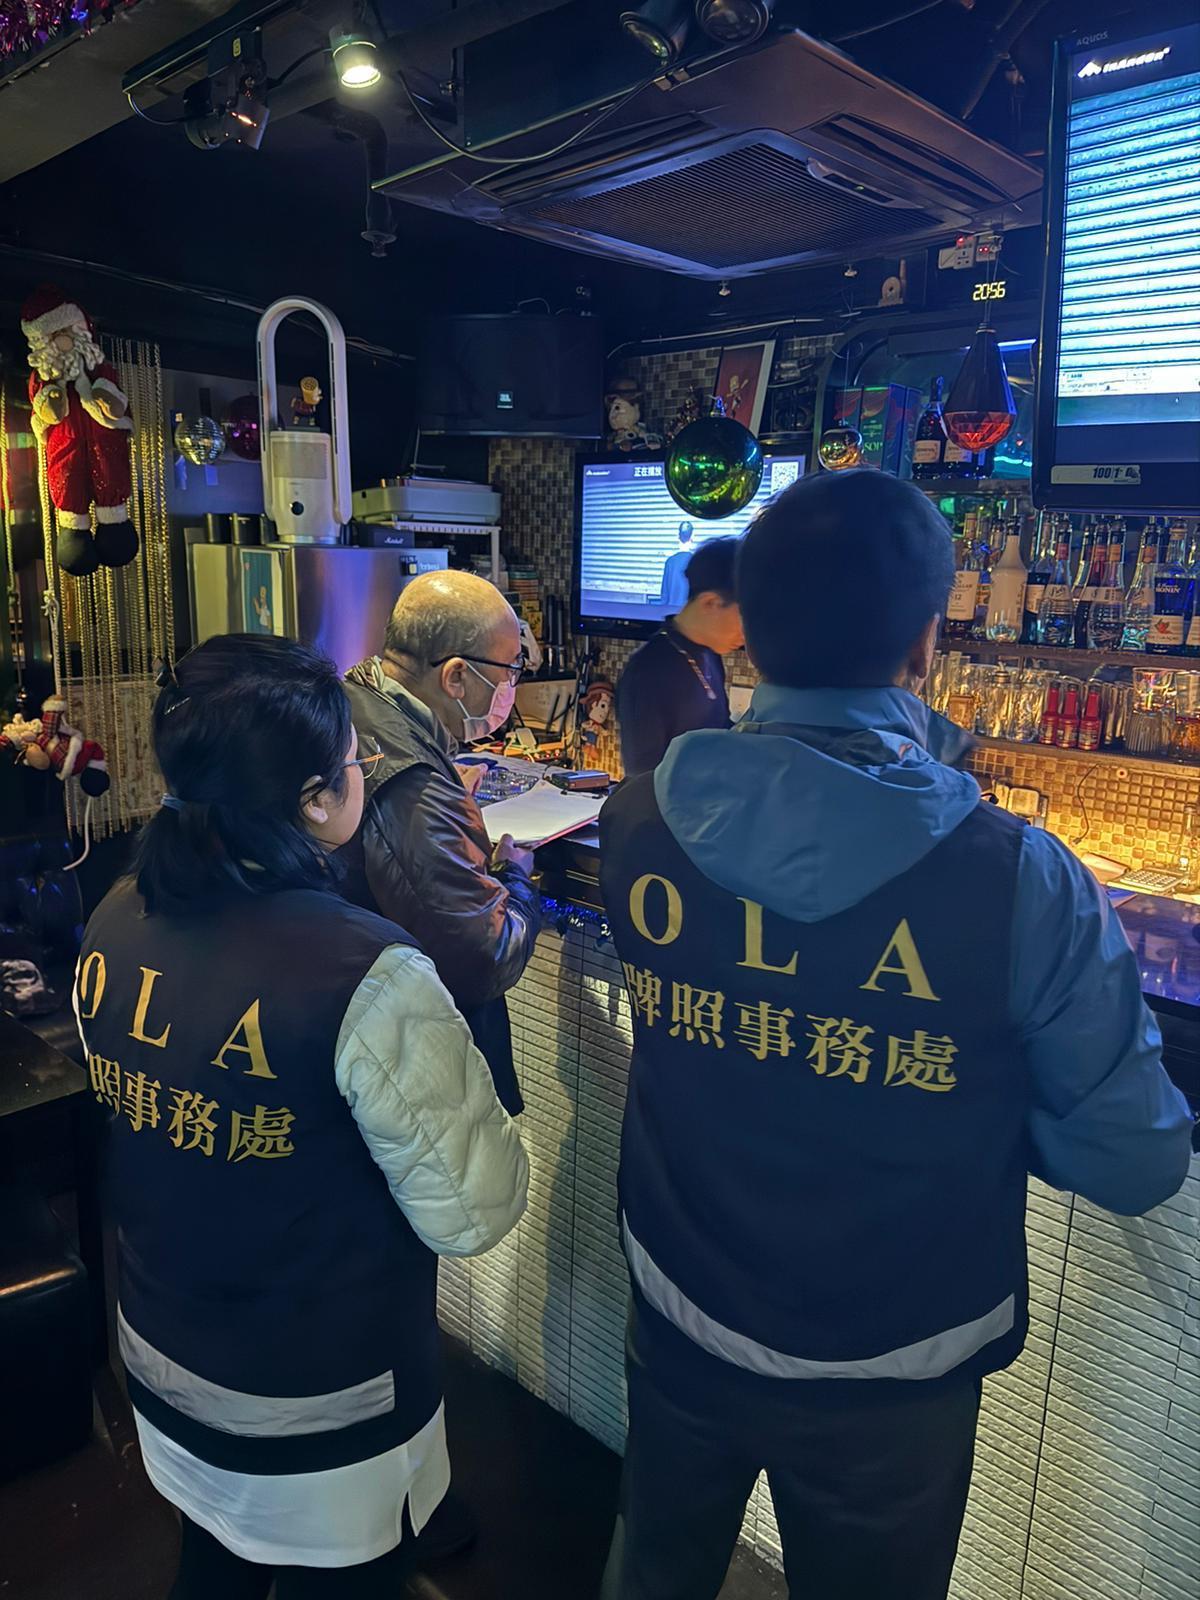 The Office of the Licensing Authority (OLA) of the Home Affairs Department conducted a joint operation with the Fire Services Department codenamed "Solar Flare" against unlicensed hotels/guesthouses and illegal club-house operations for two consecutive days on December 20 and 21 at various spots in areas of Hong Kong Island and Kowloon. Photo shows OLA enforcement officers conducting surprise check at a club-house.
